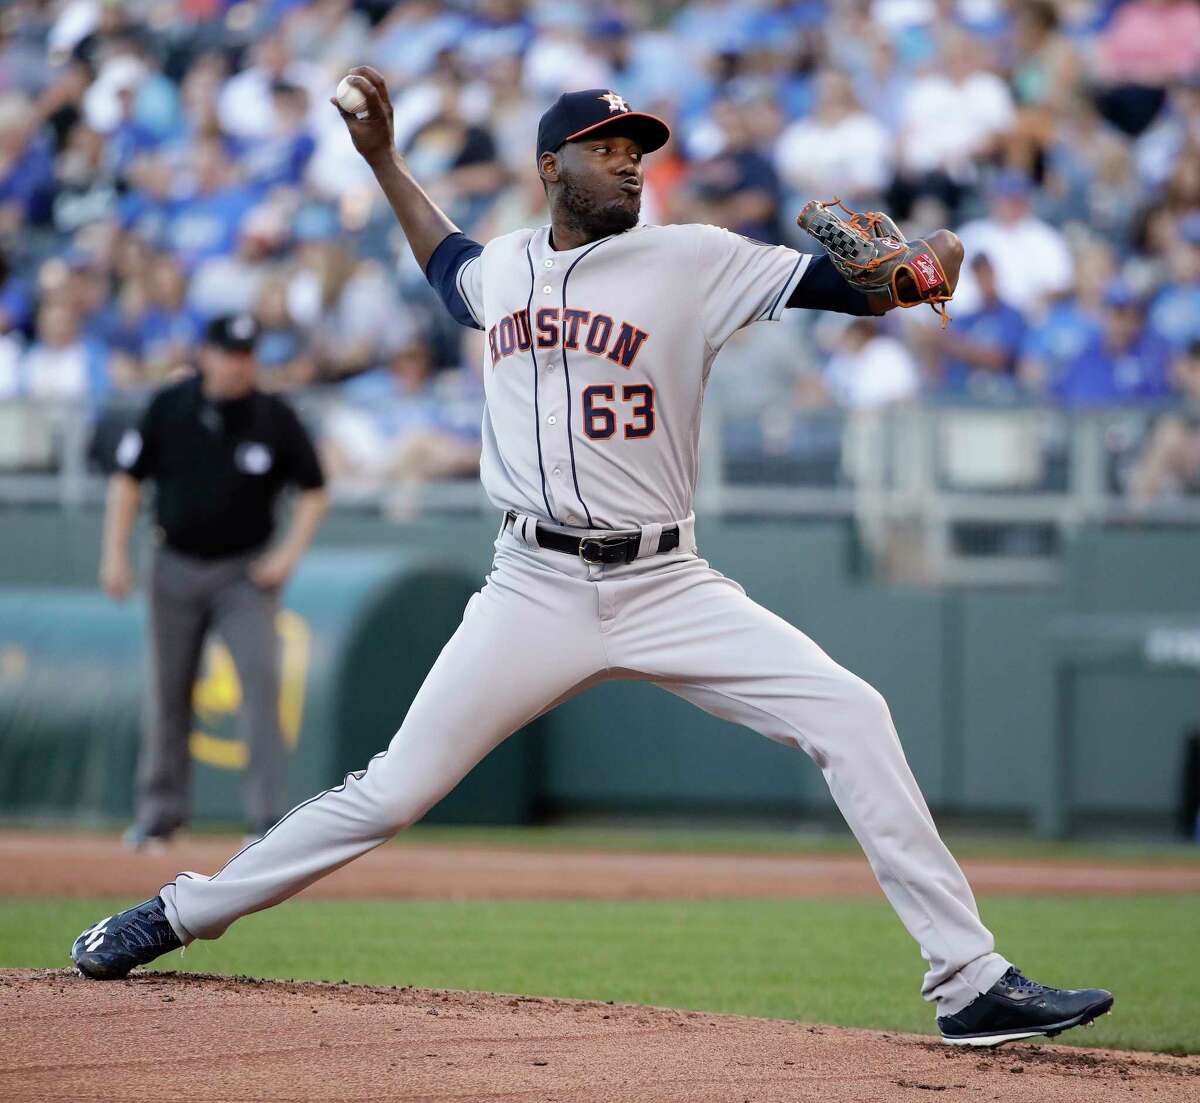 Houston Astros starting pitcher David Paulino throws during the first inning of a baseball game against the Kansas City Royals Tuesday, June 6, 2017, in Kansas City, Mo. (AP Photo/Charlie Riedel)